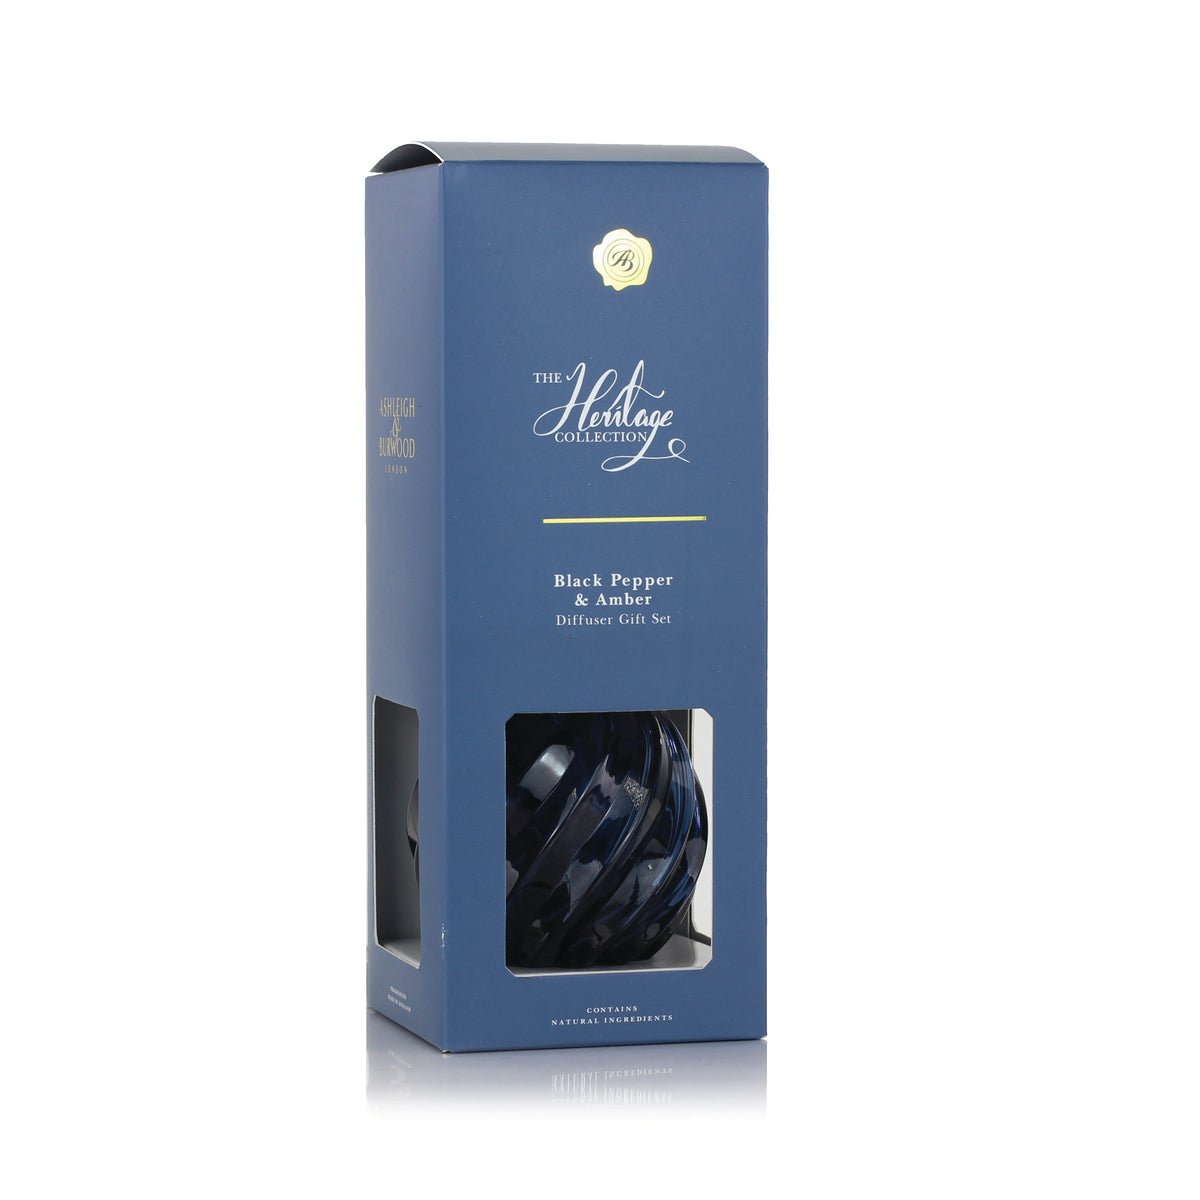 Heritage Collection | Black Pepper & Amber Gift Set